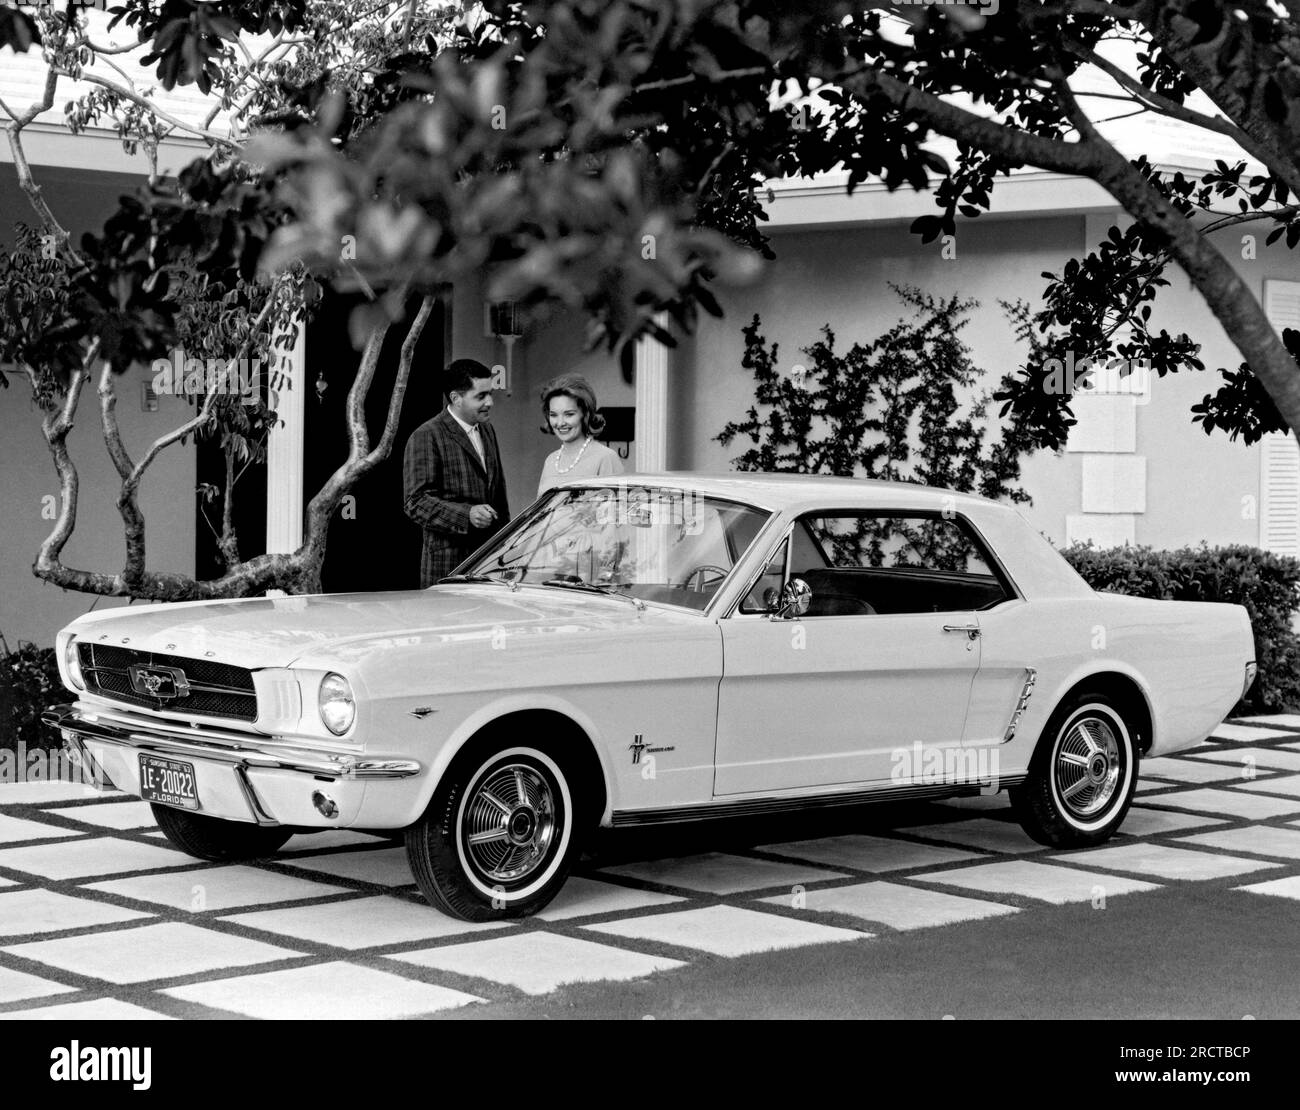 Florida:  1963 The new Ford Mustang, which was introduced to the public on April 17, 1964 at the New York World's Fair. Stock Photo